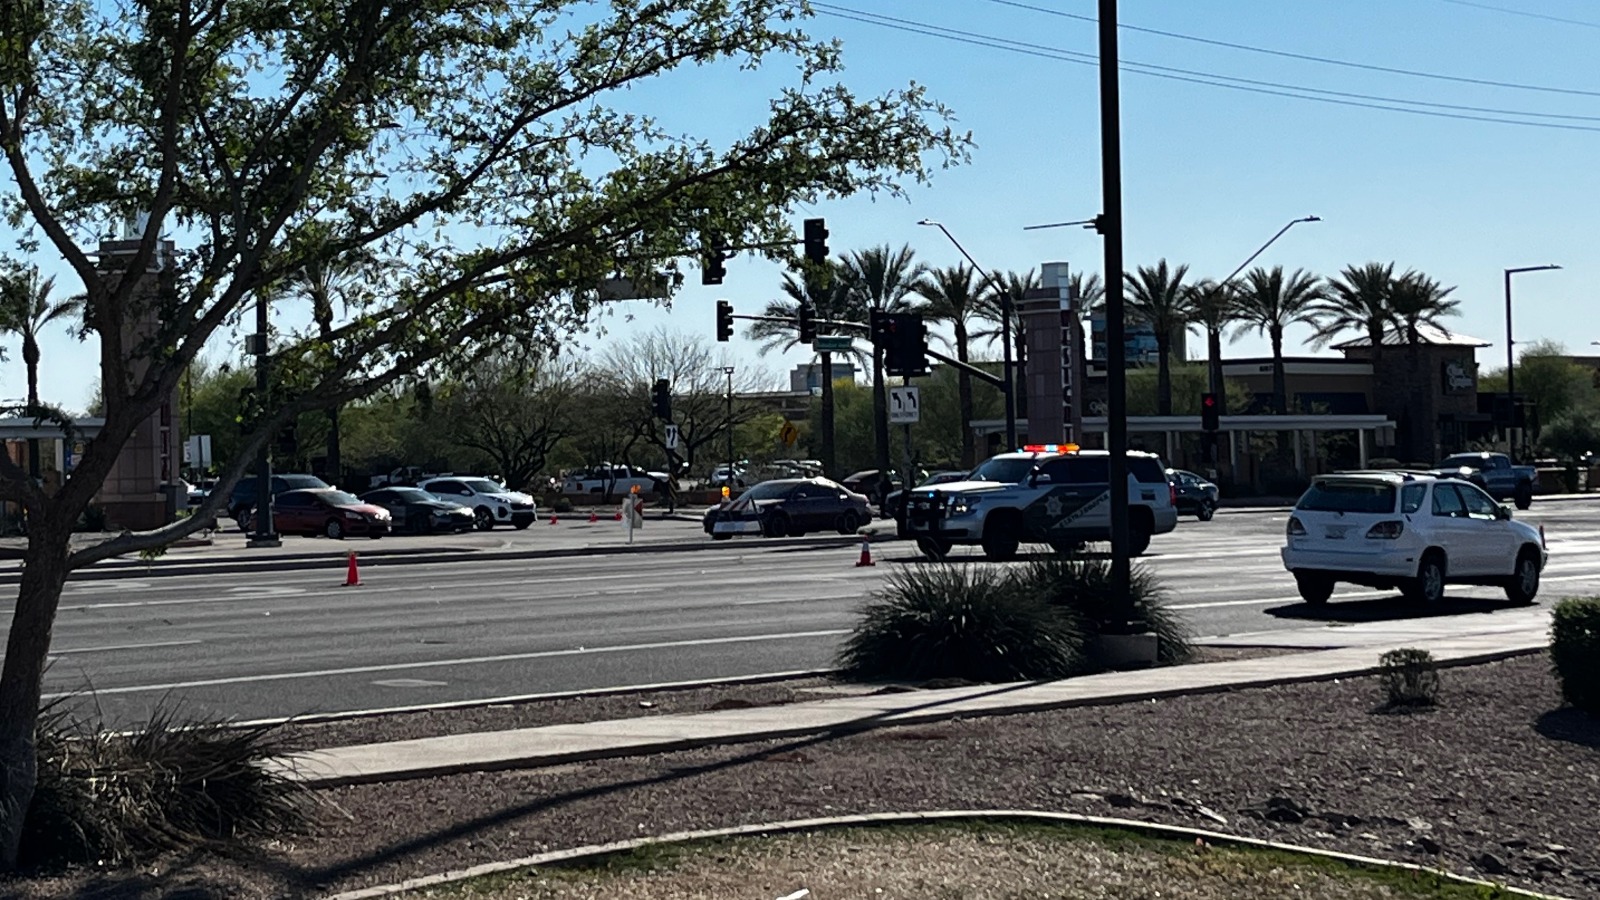 5 people, including child, injured in shooting at Tanger Outlets in Glendale